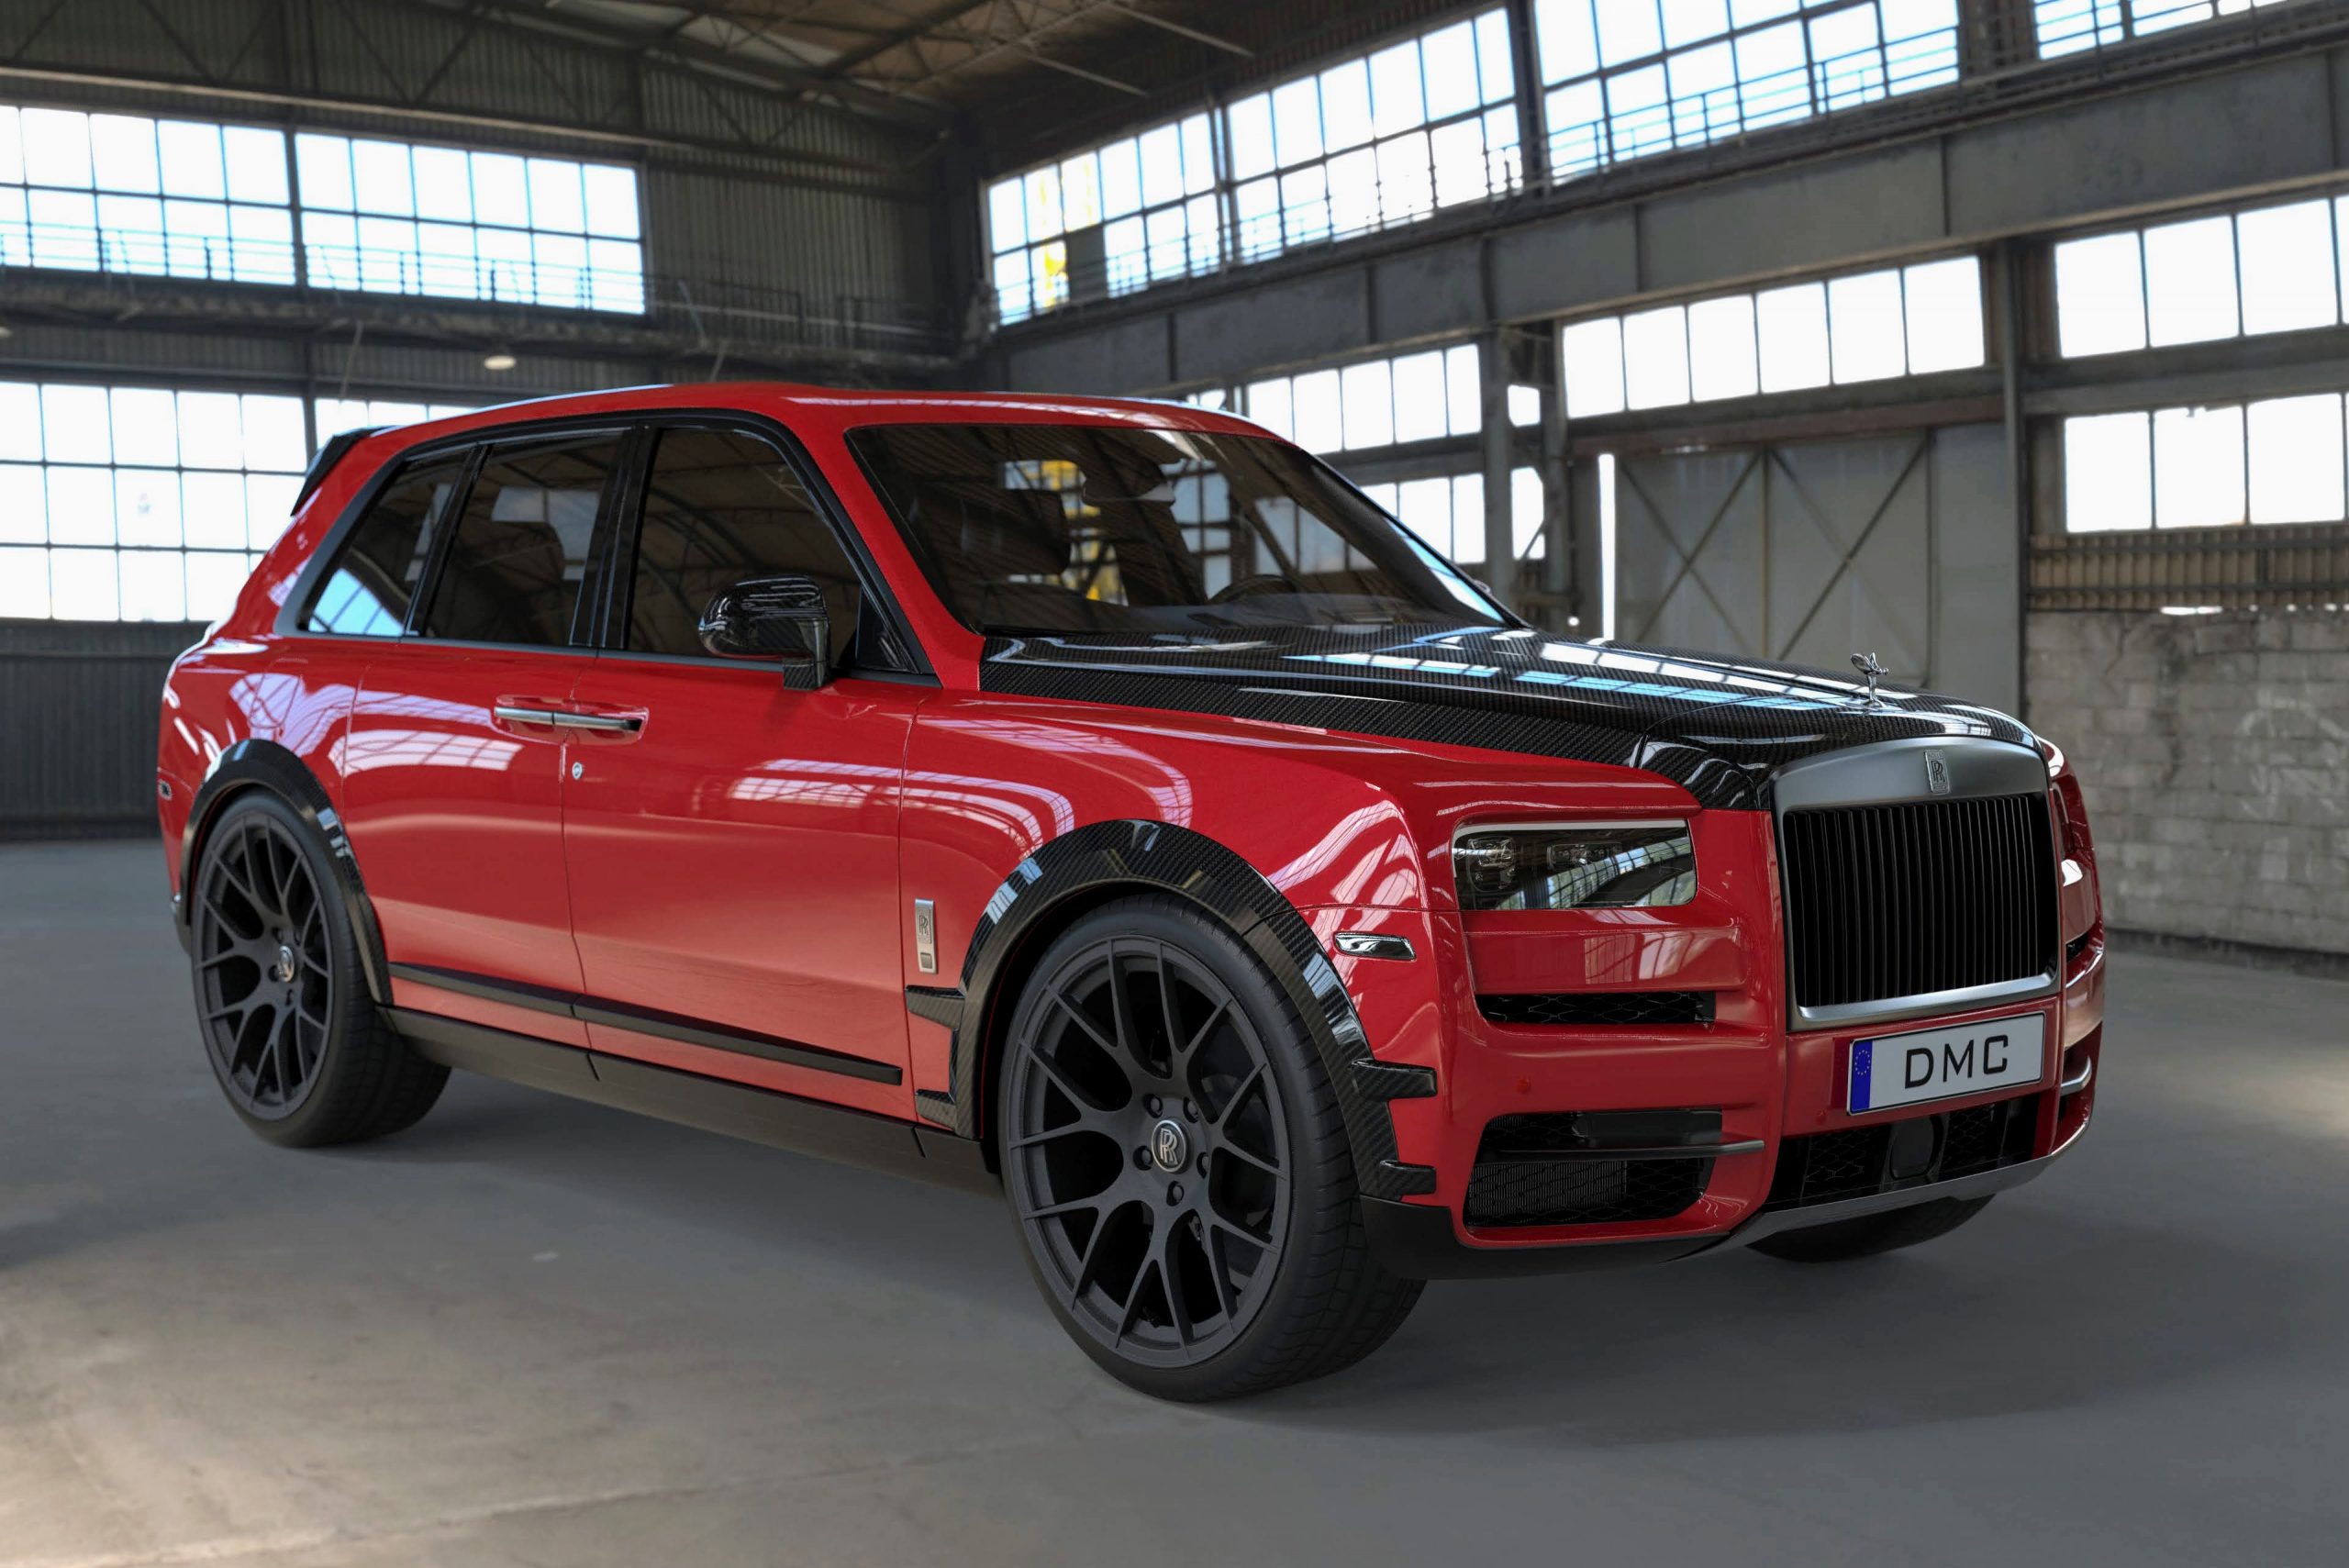 Rolls Royce Cullinan Wide Body Modified: Side View: Carbon Fiber Front Hood & SIde SKirts